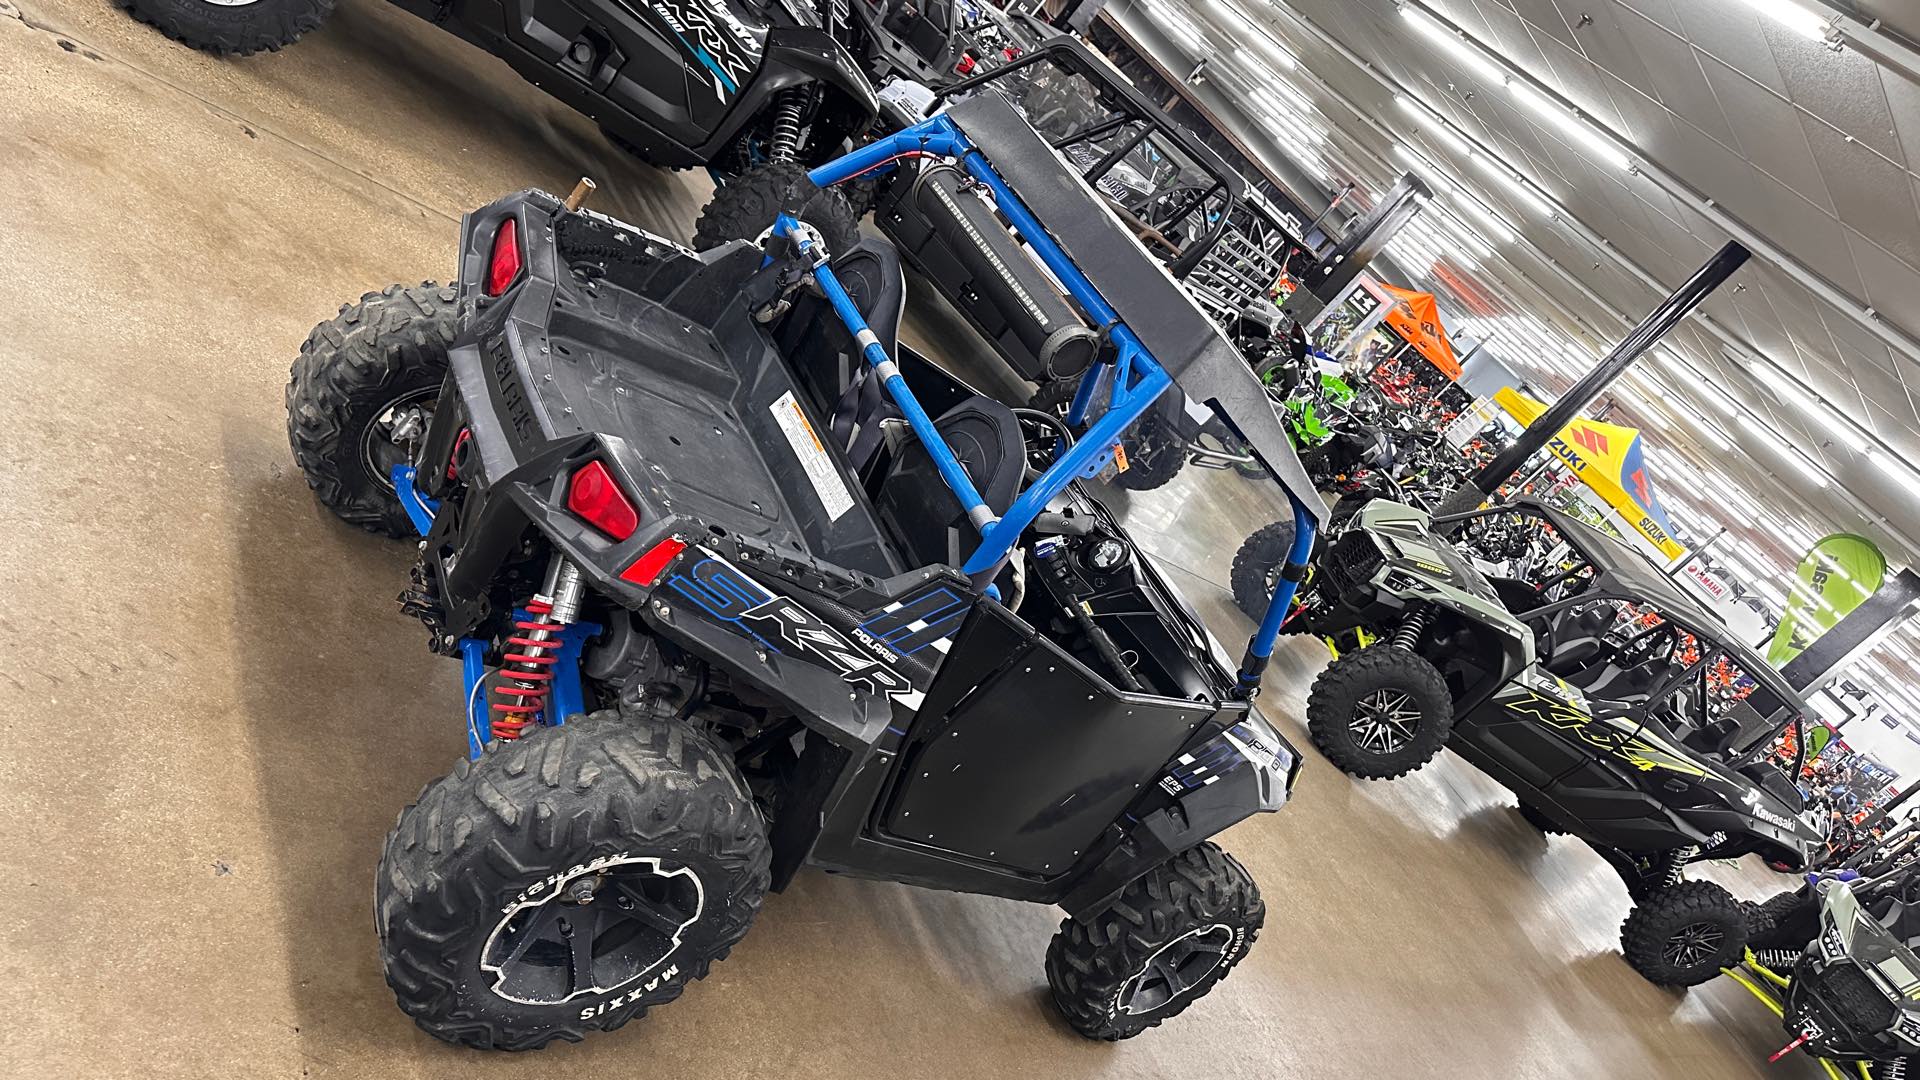 2014 Polaris RZR S 800 EPS Stealth Black LE at ATVs and More